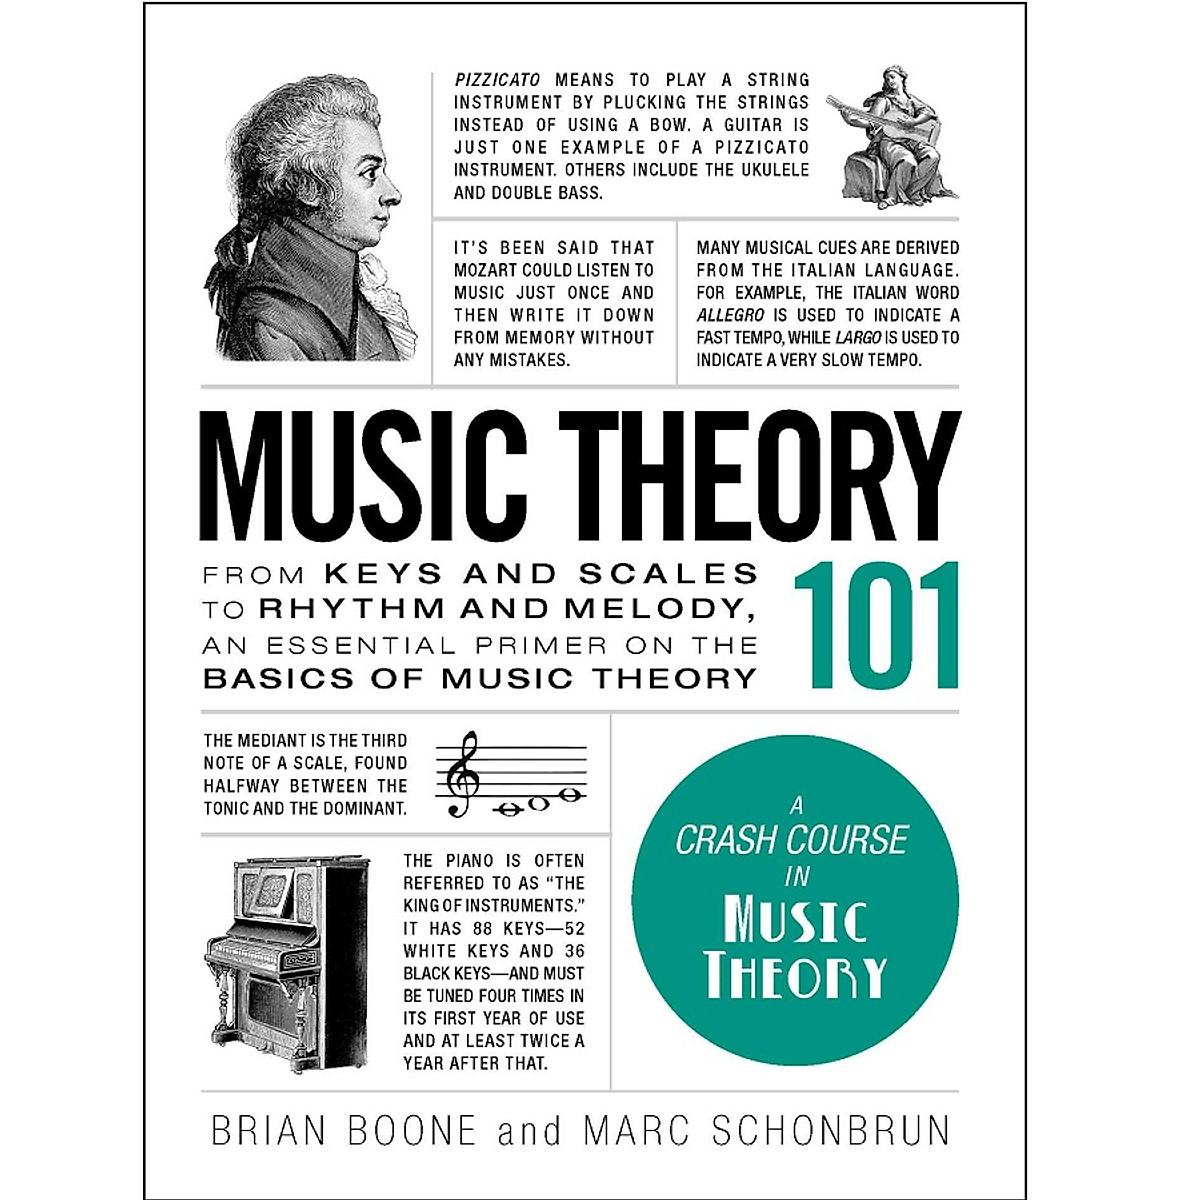 Music Theory 101: From keys and scales to rhythm and melody, an essential primer on the basics of music theory (Adams 101)